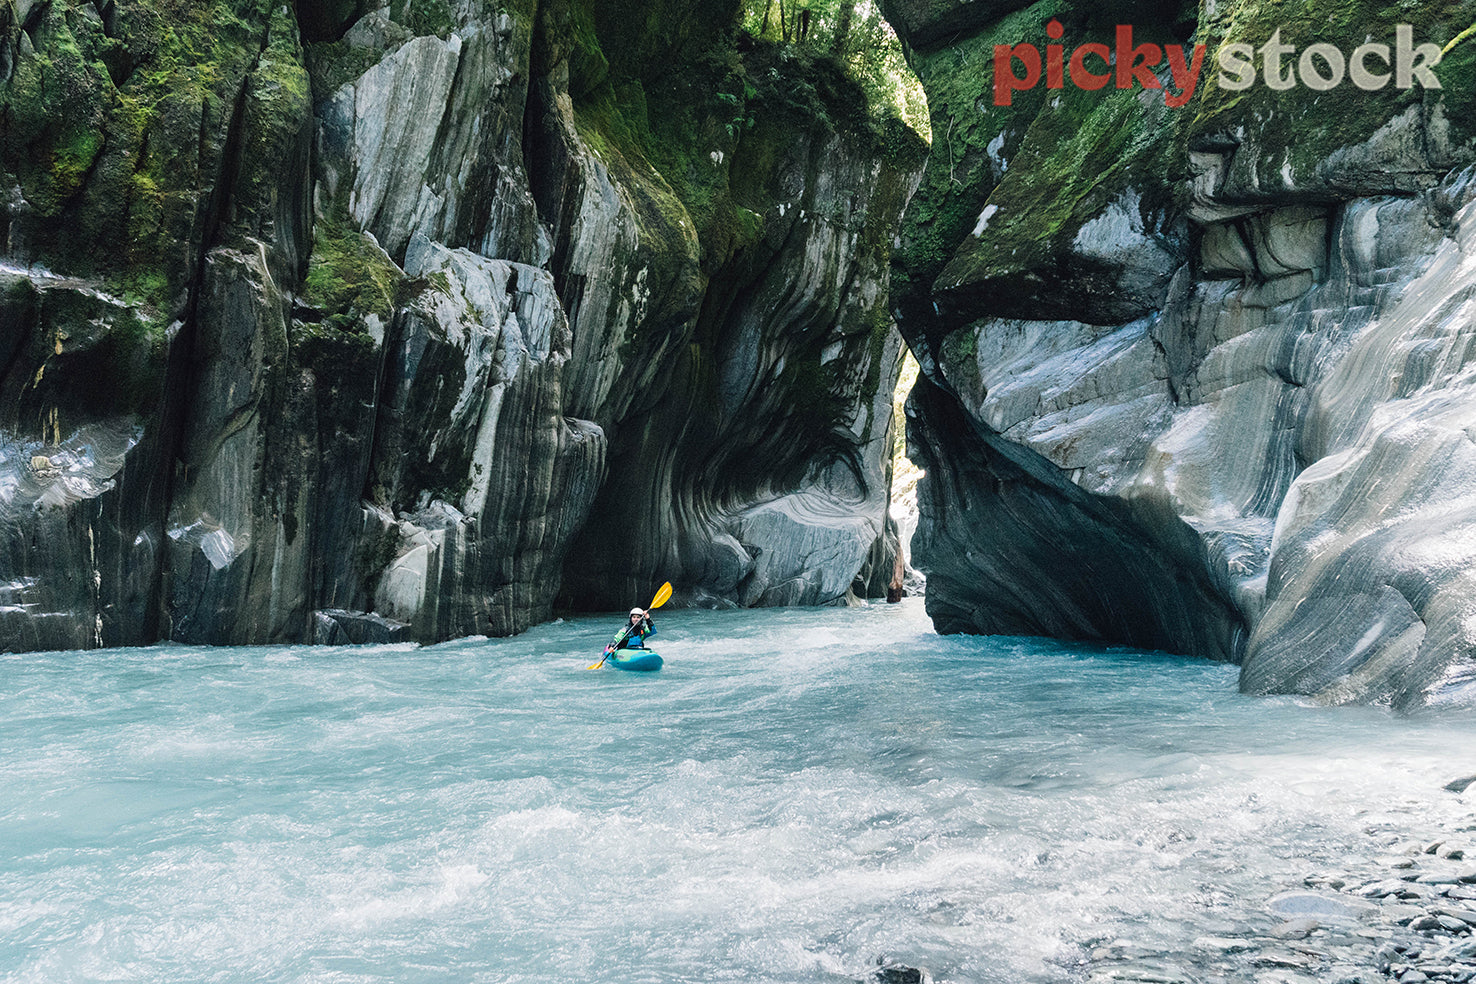 Whitewater kayaker in a gorge on a turquoise river